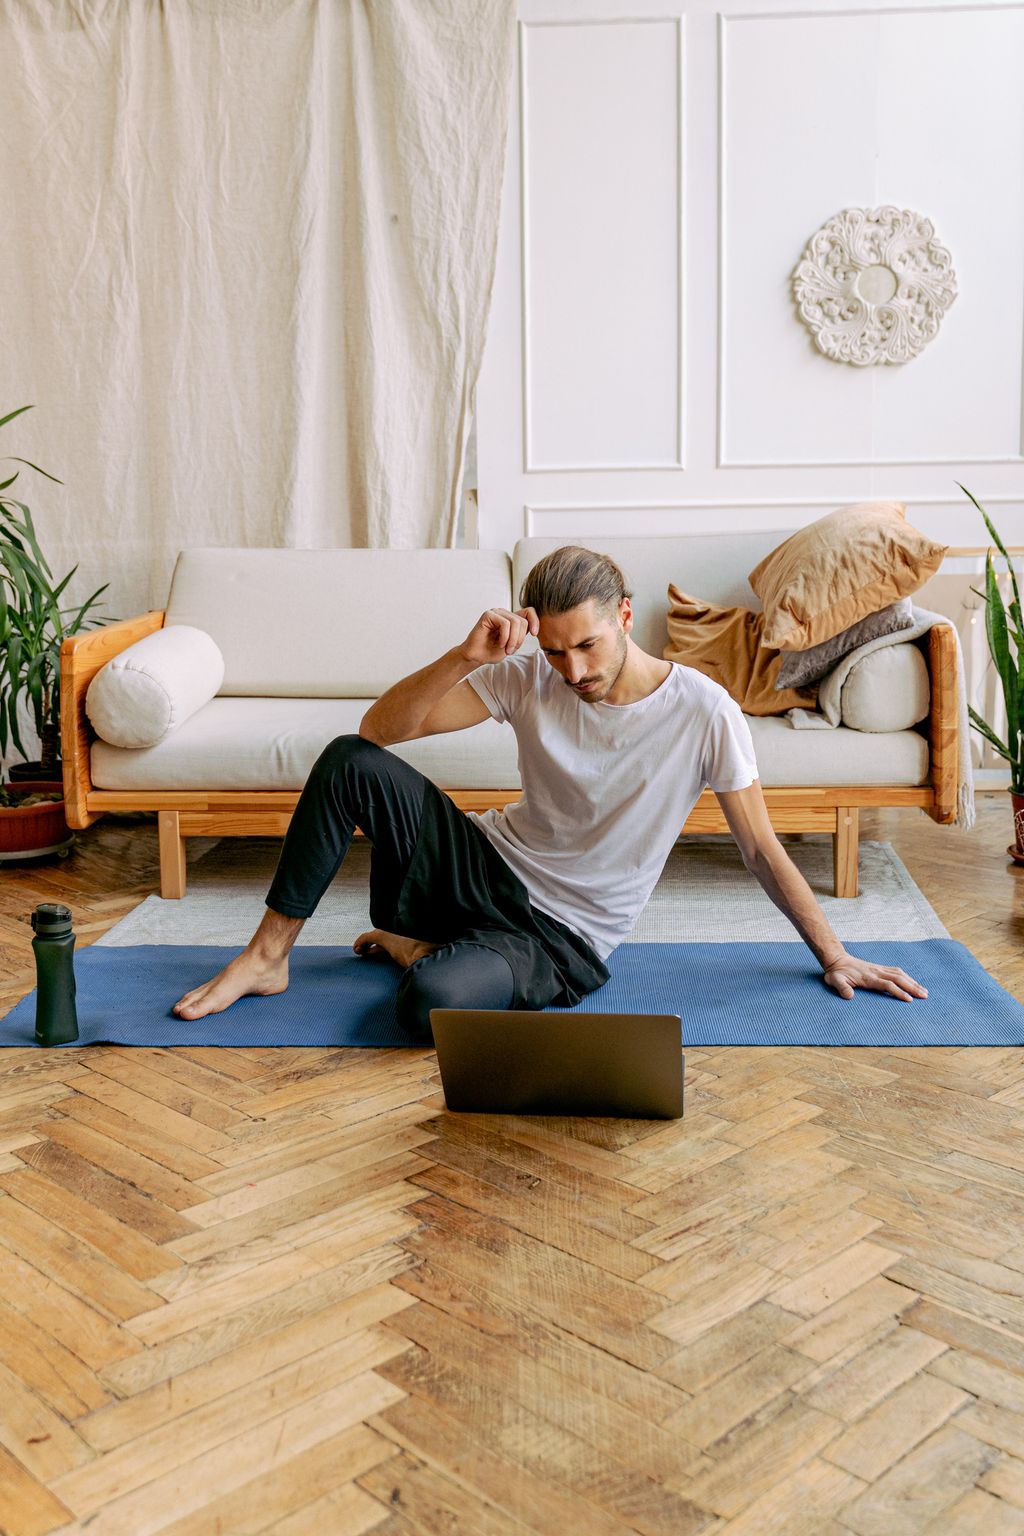 Choosing the Right Cork Yoga Mat for Your Practice